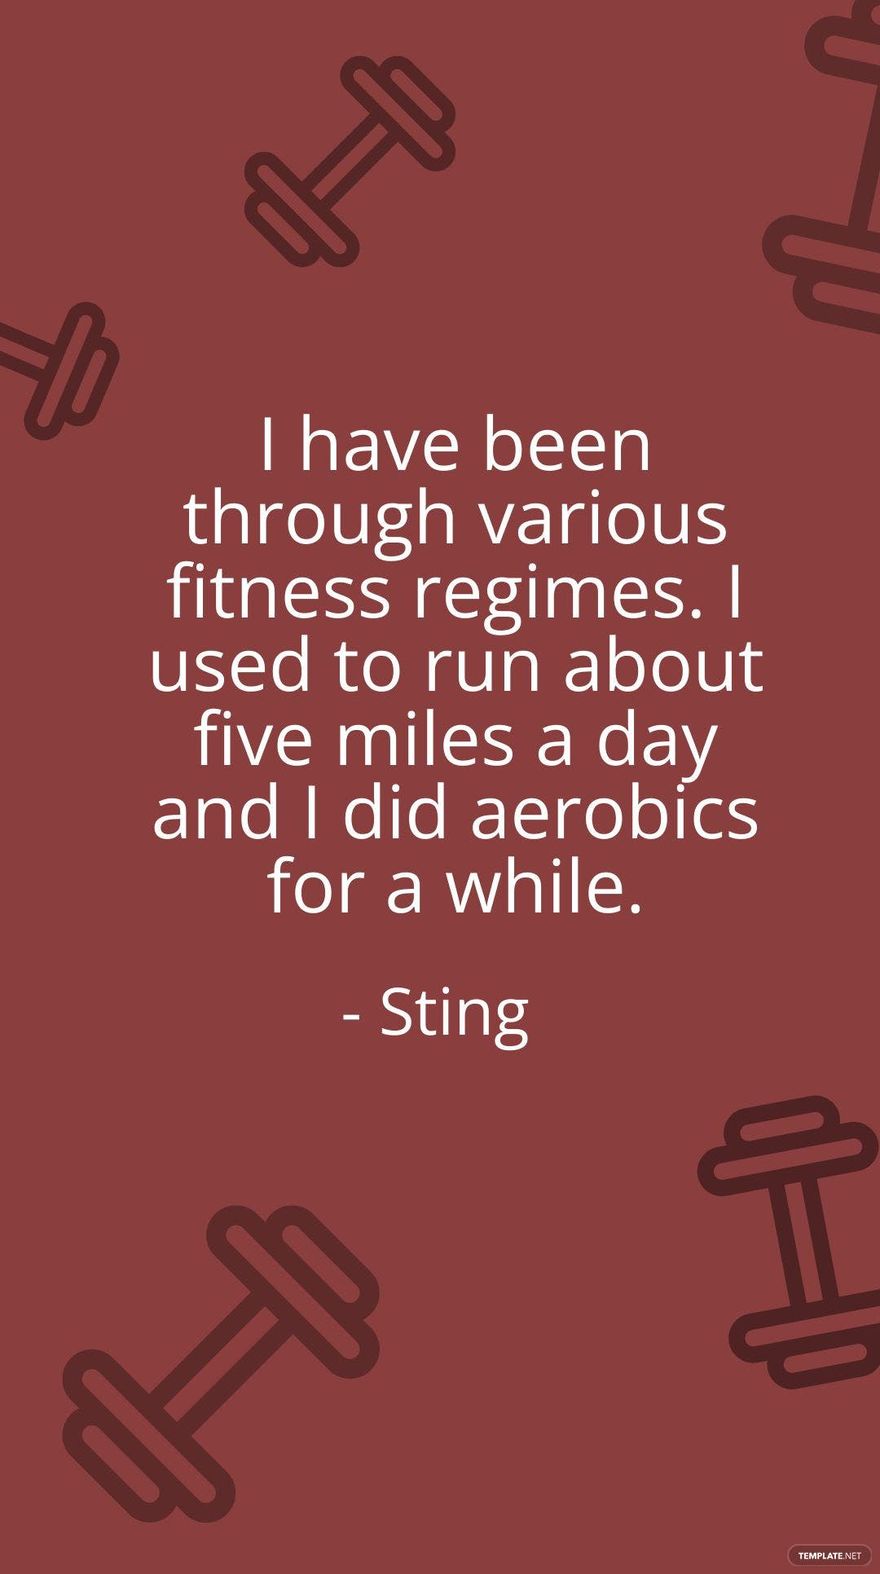 Sting - I have been through various fitness regimes. I used to run about five miles a day and I did aerobics for a while. in JPG